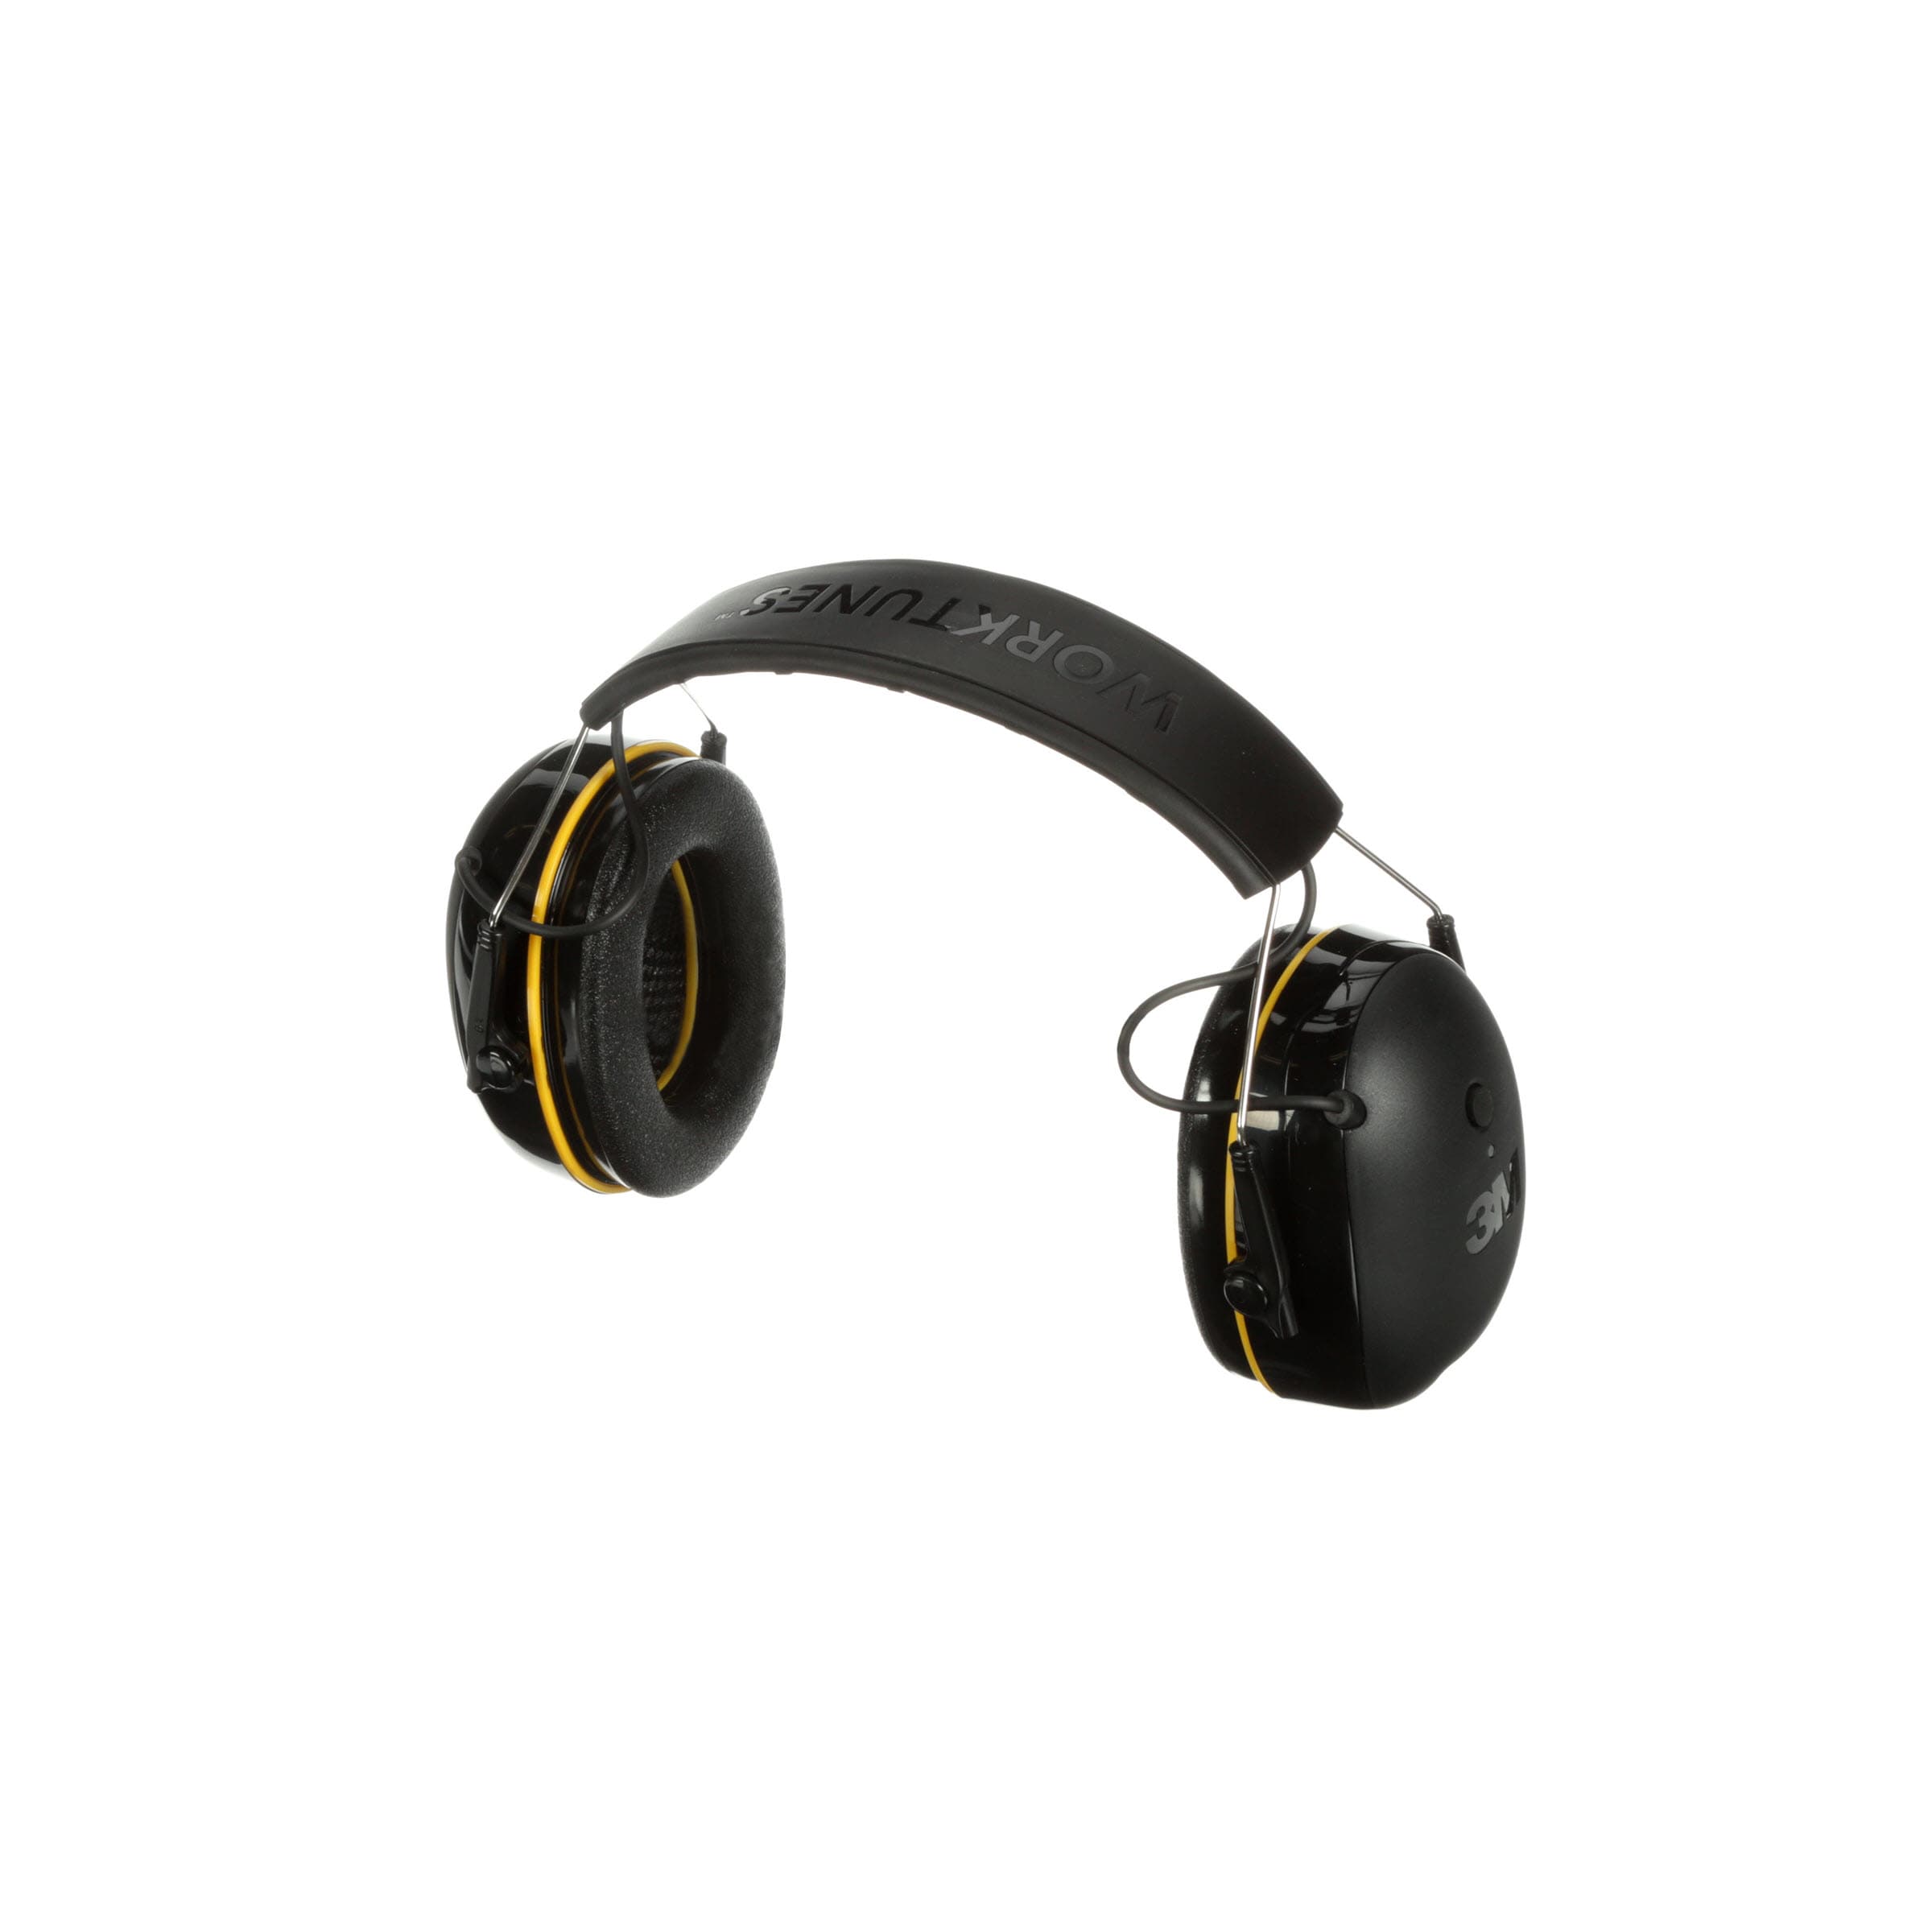 3M™ WorkTunes™ Connect Wireless Hearing Protector Earmuffs with